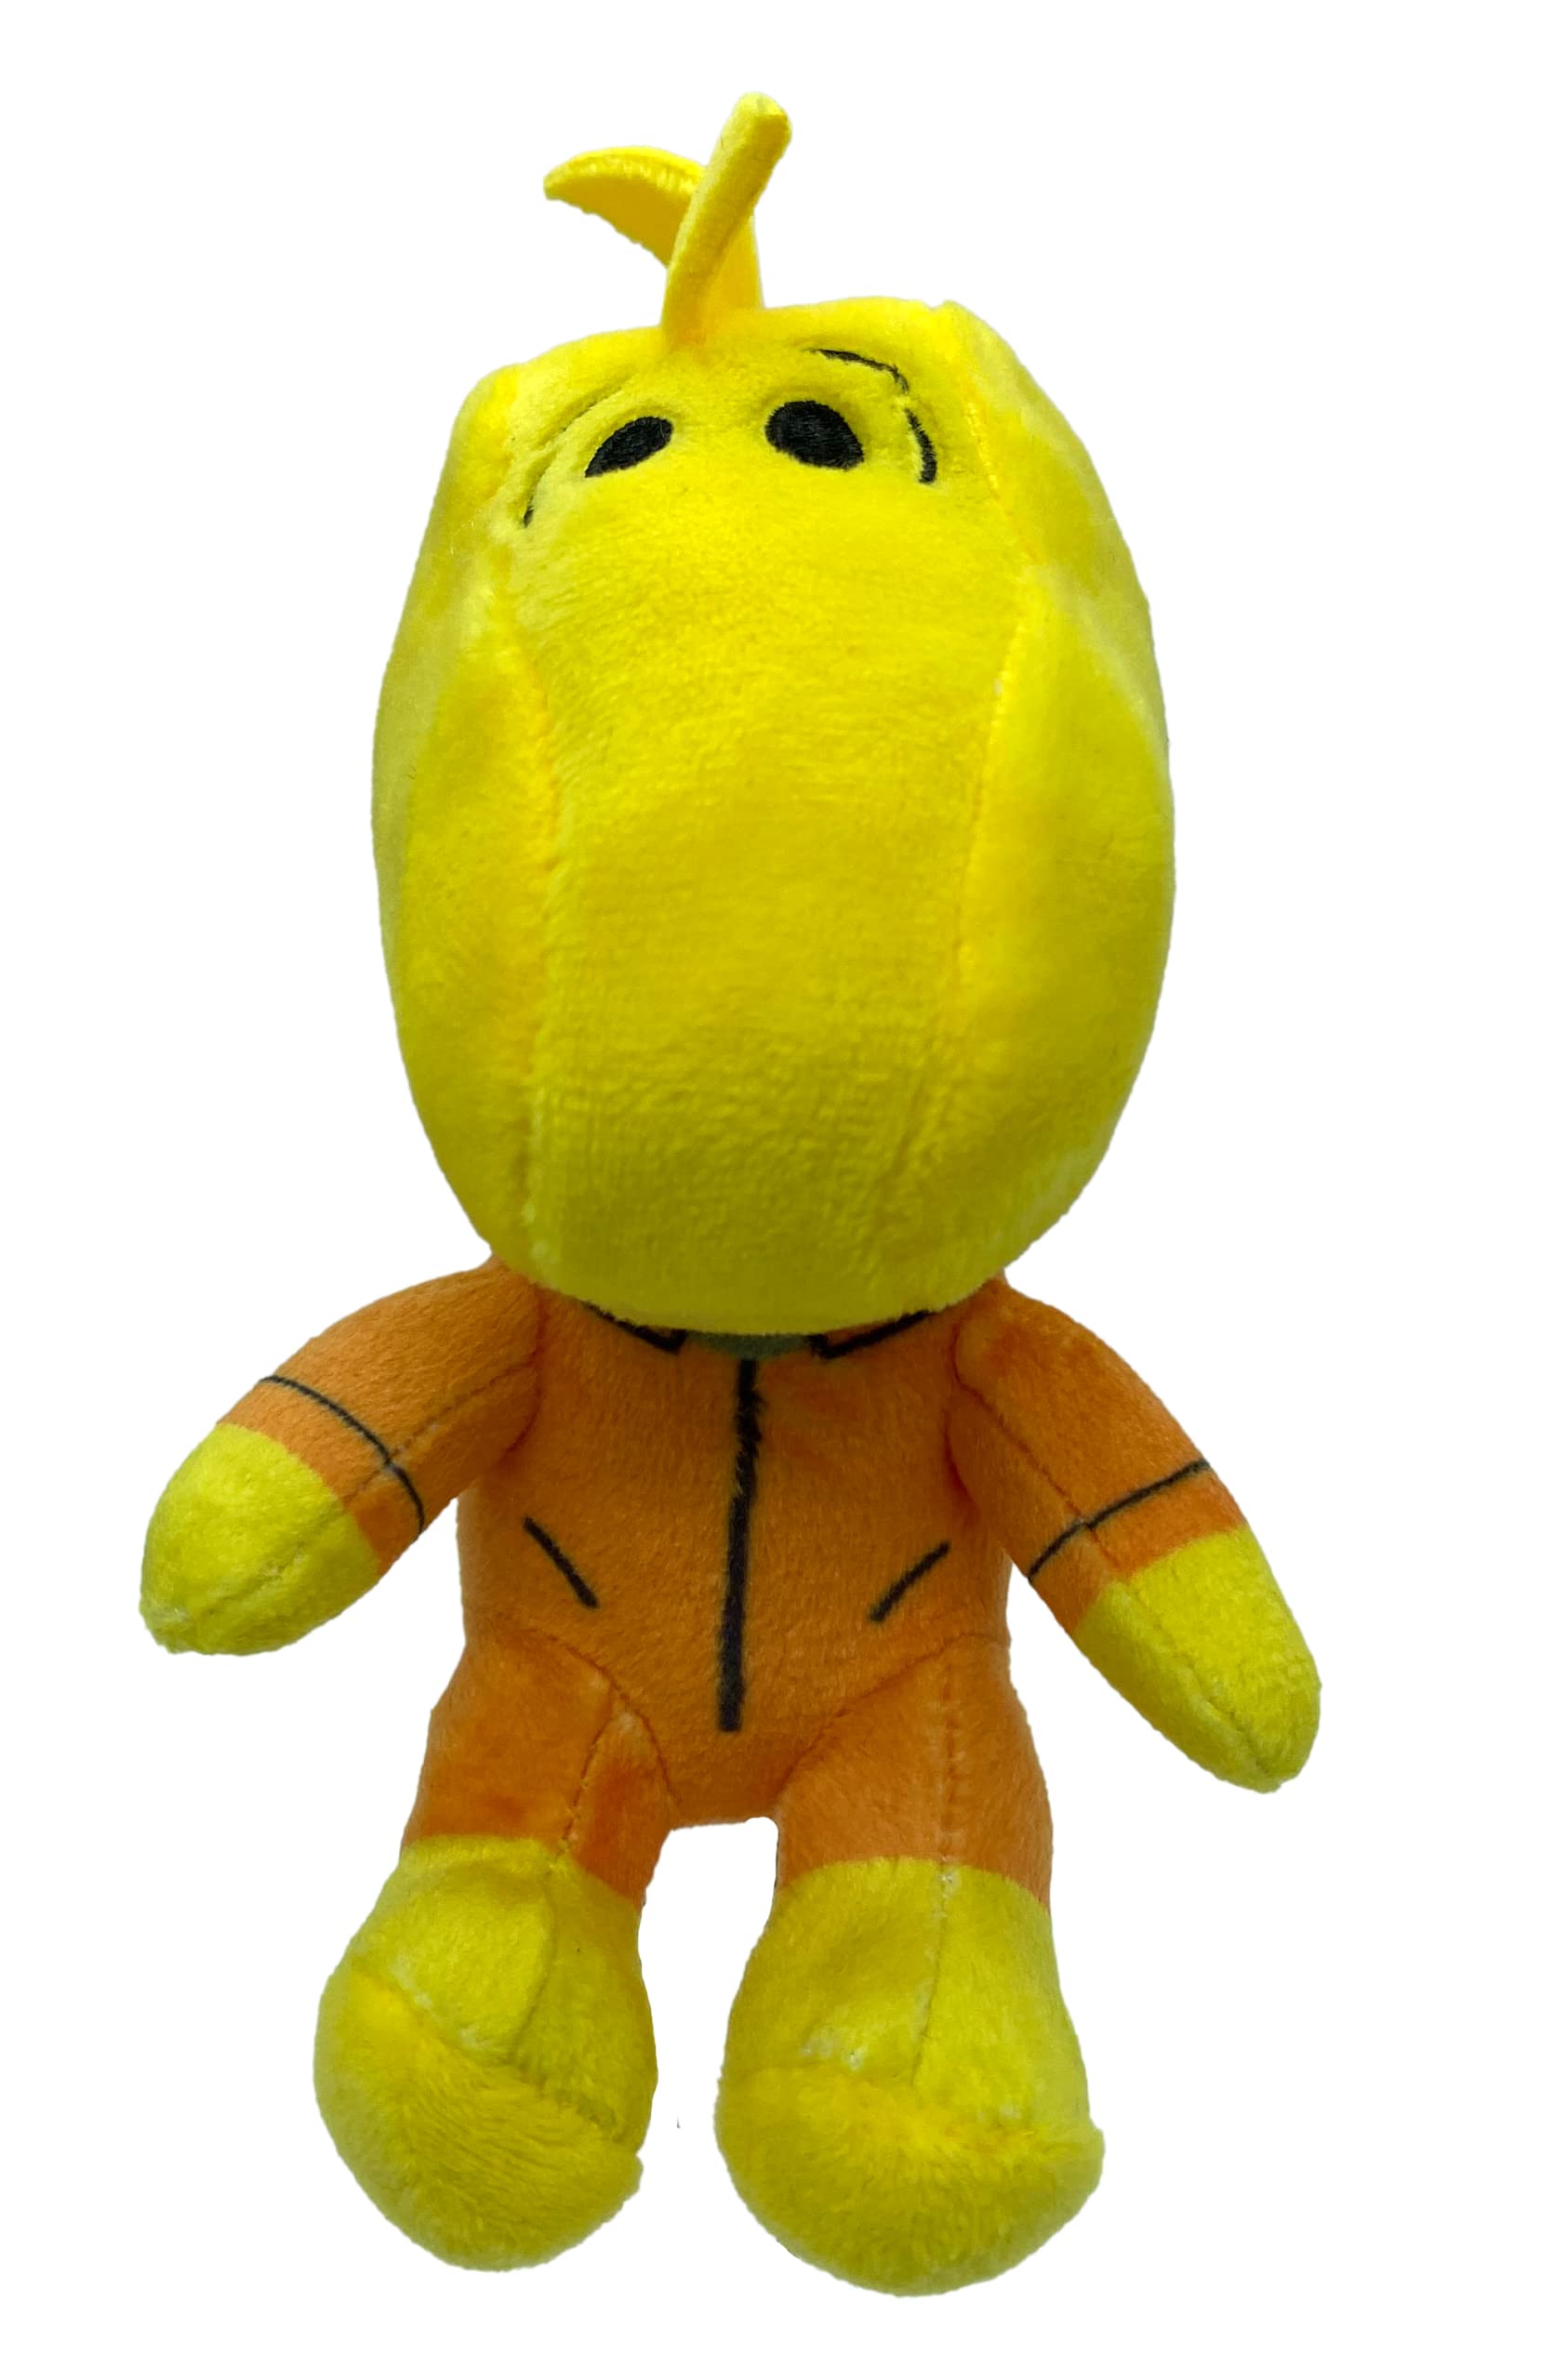 JINX Official Peanuts Collectible Plush Woodstock, Excellent Plushie Toy for Toddlers & Preschool, Super Cute Orange Flight Maverick